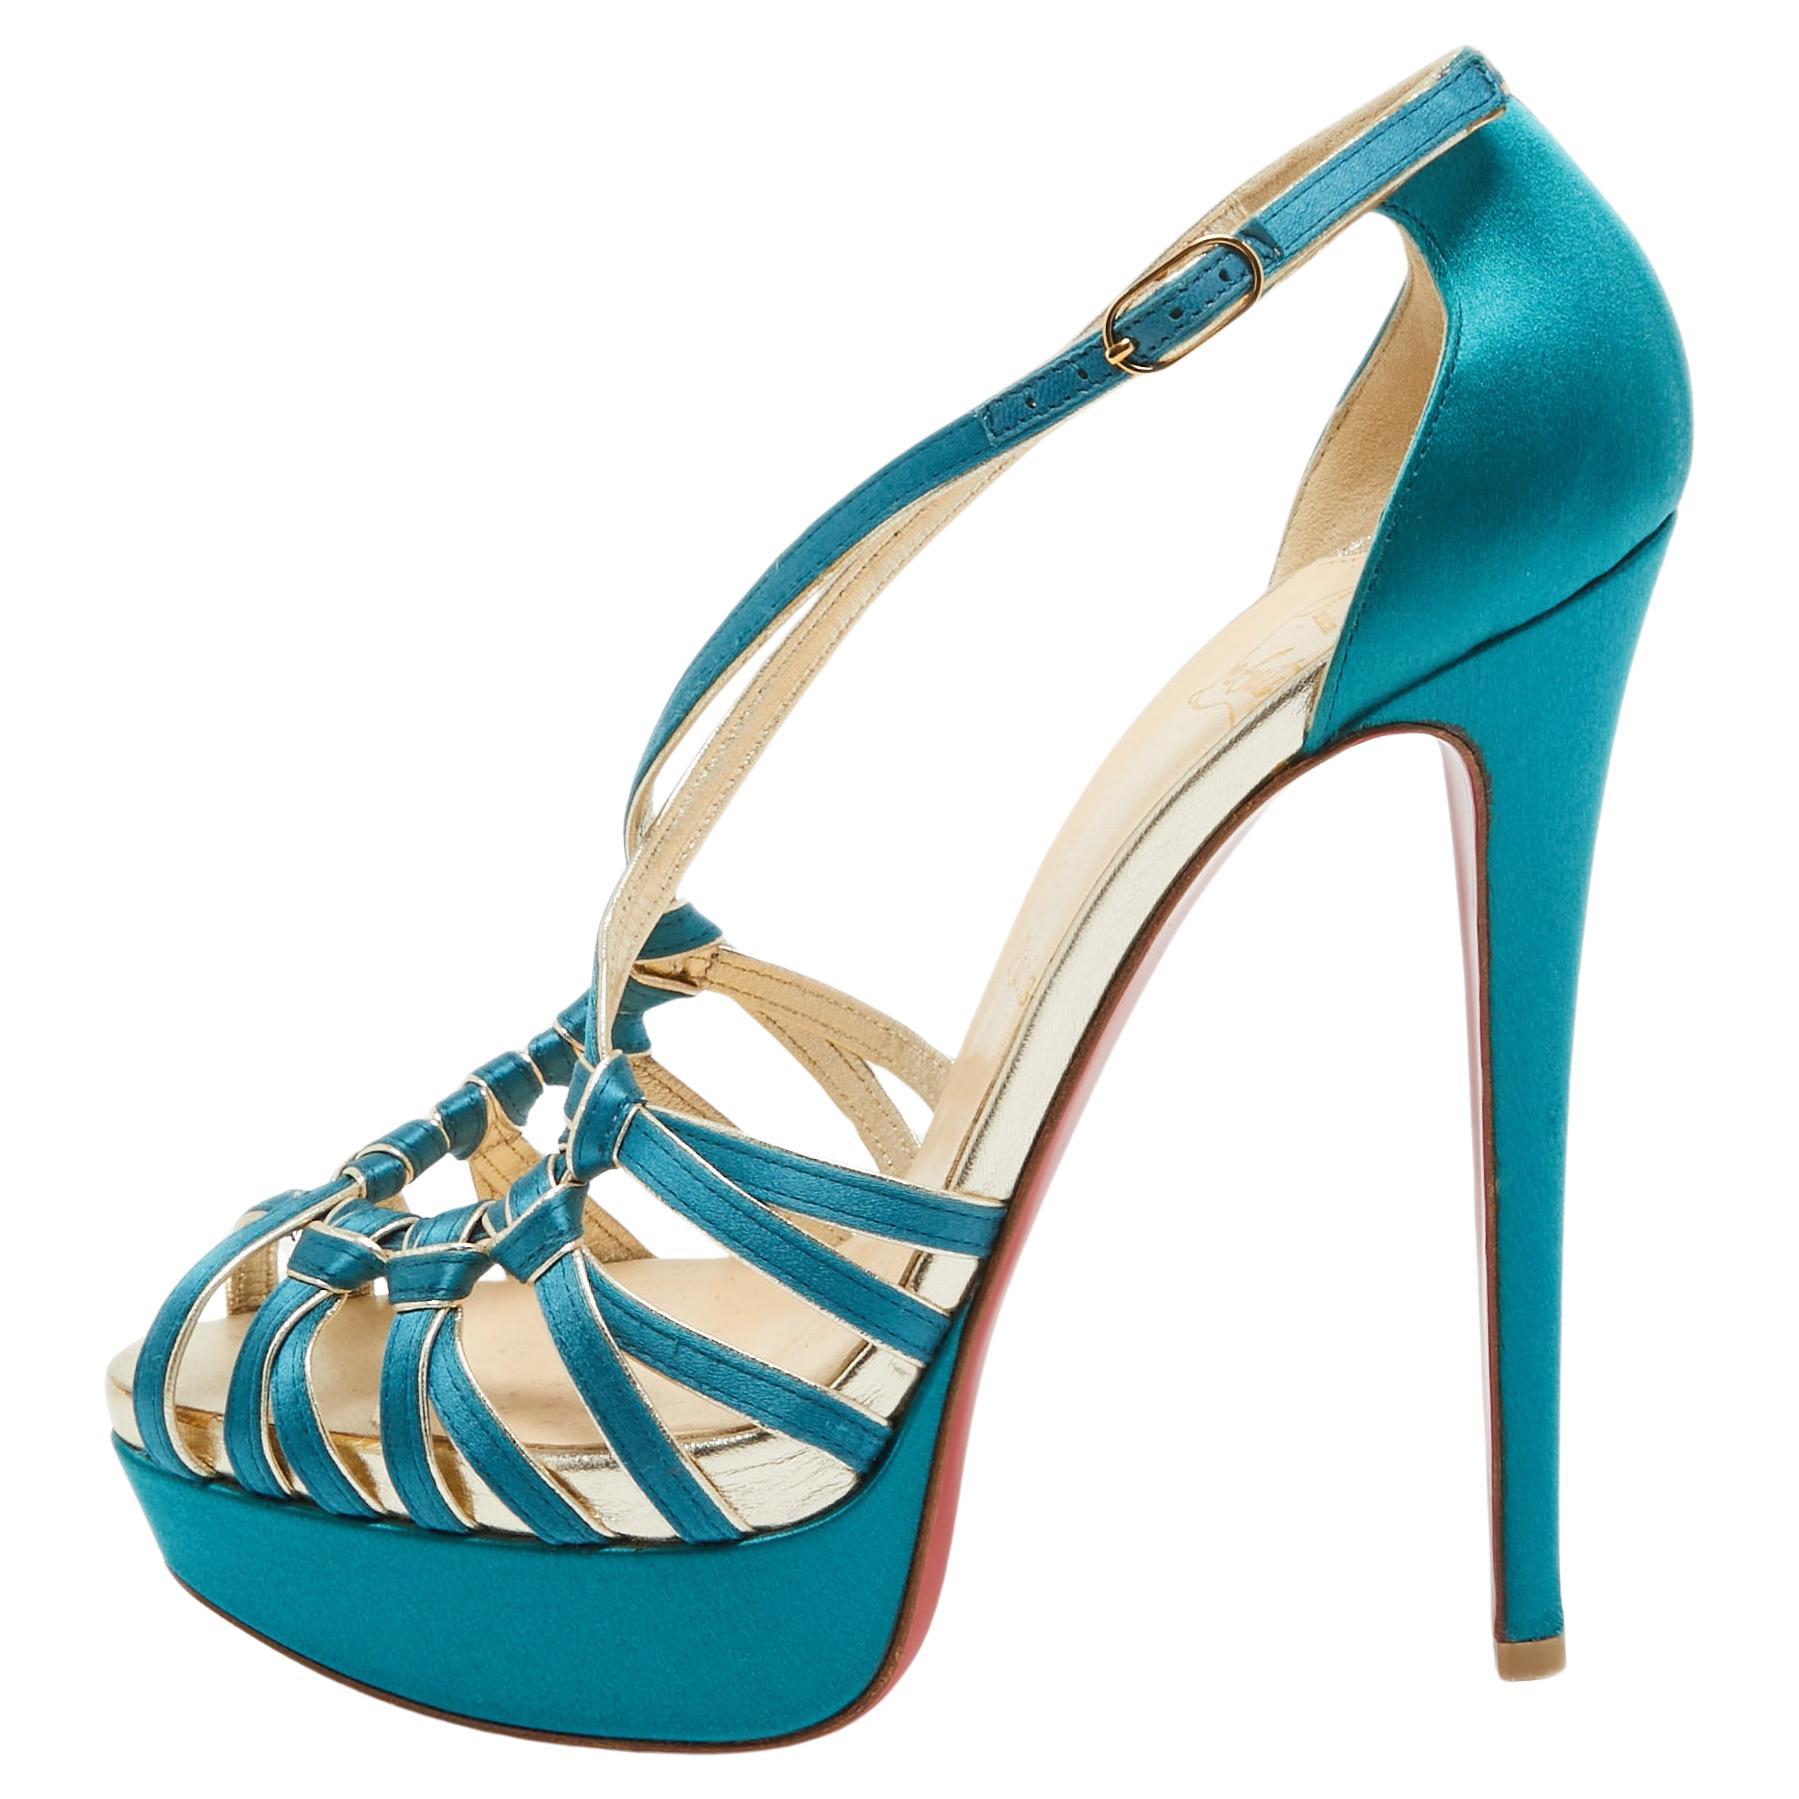 Christian Louboutin Teal Satin Knotted Strappy Platform Sandals Size 39 For Sale